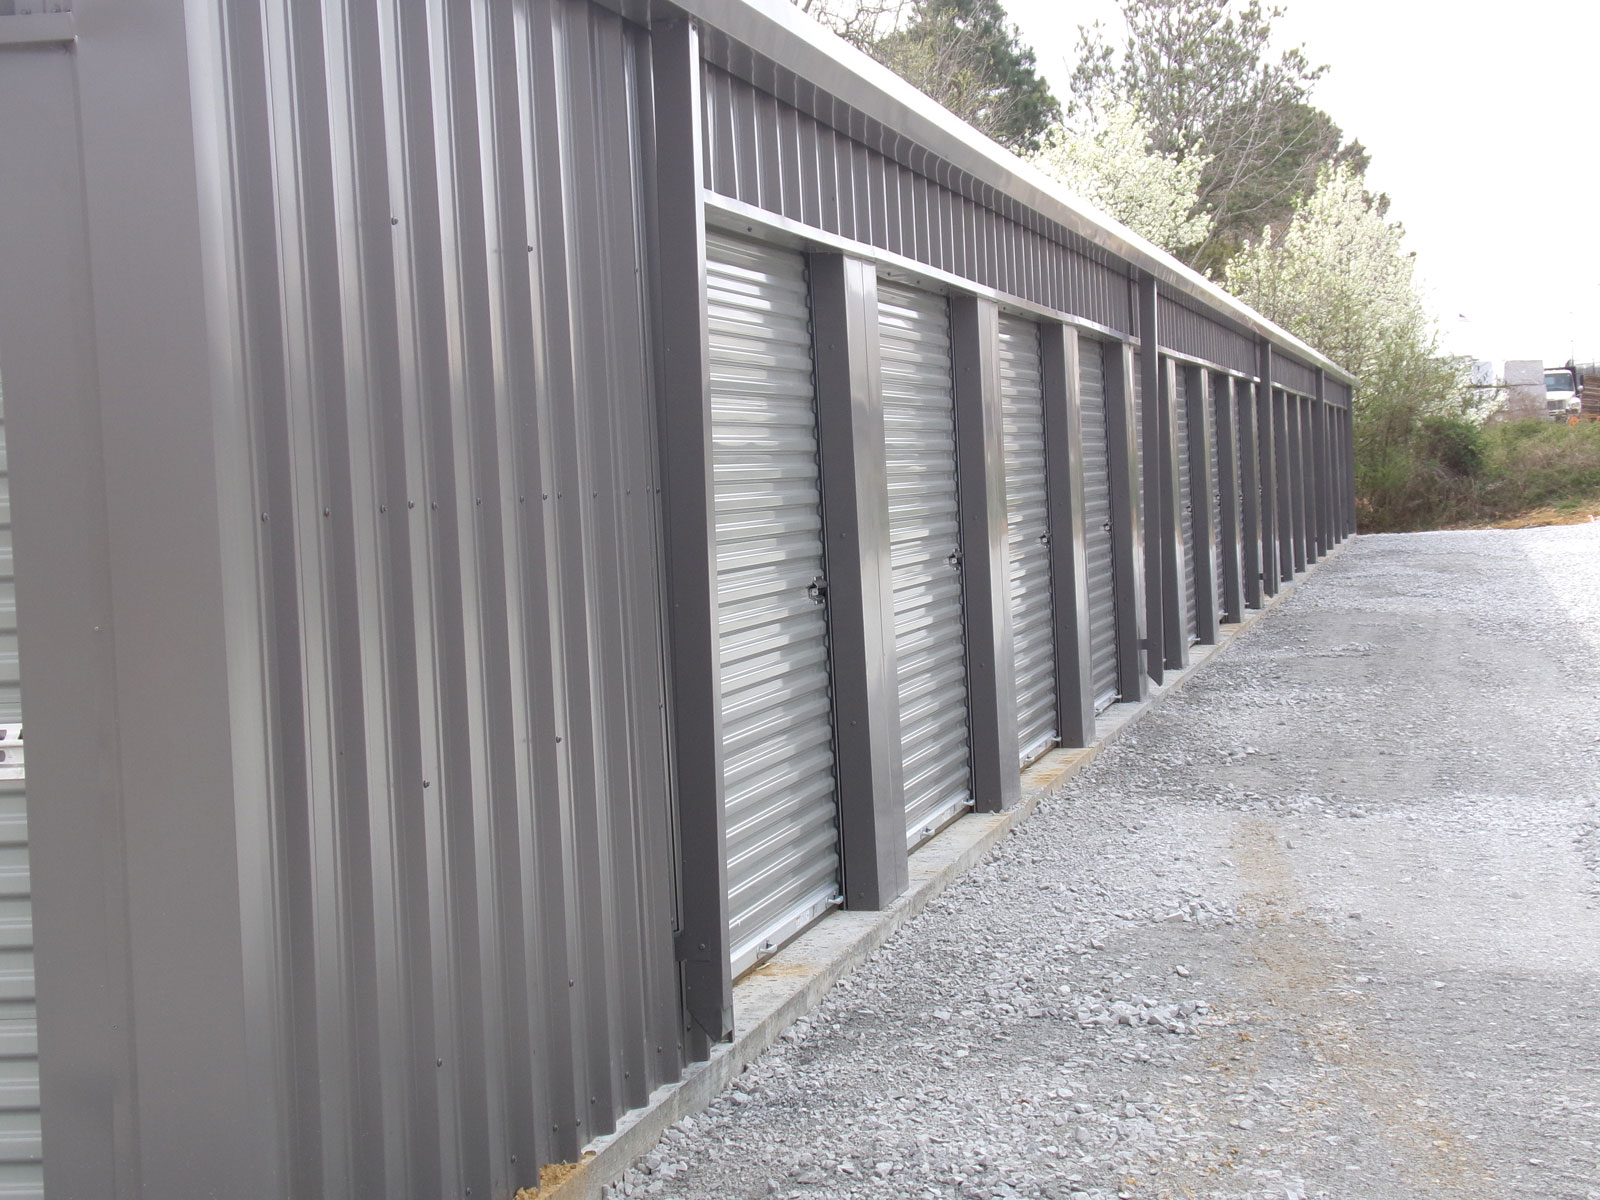 mini self Storage building50’x210’x8’-6”’
Cold form frame
29 gauge roof
26 gauge walls
Gutters and downspouts

Maryville Tennessee  approx  location
26-8’’x 7’’ roll up door
2” roof  insulation insulation
1-4070 steel walk doors